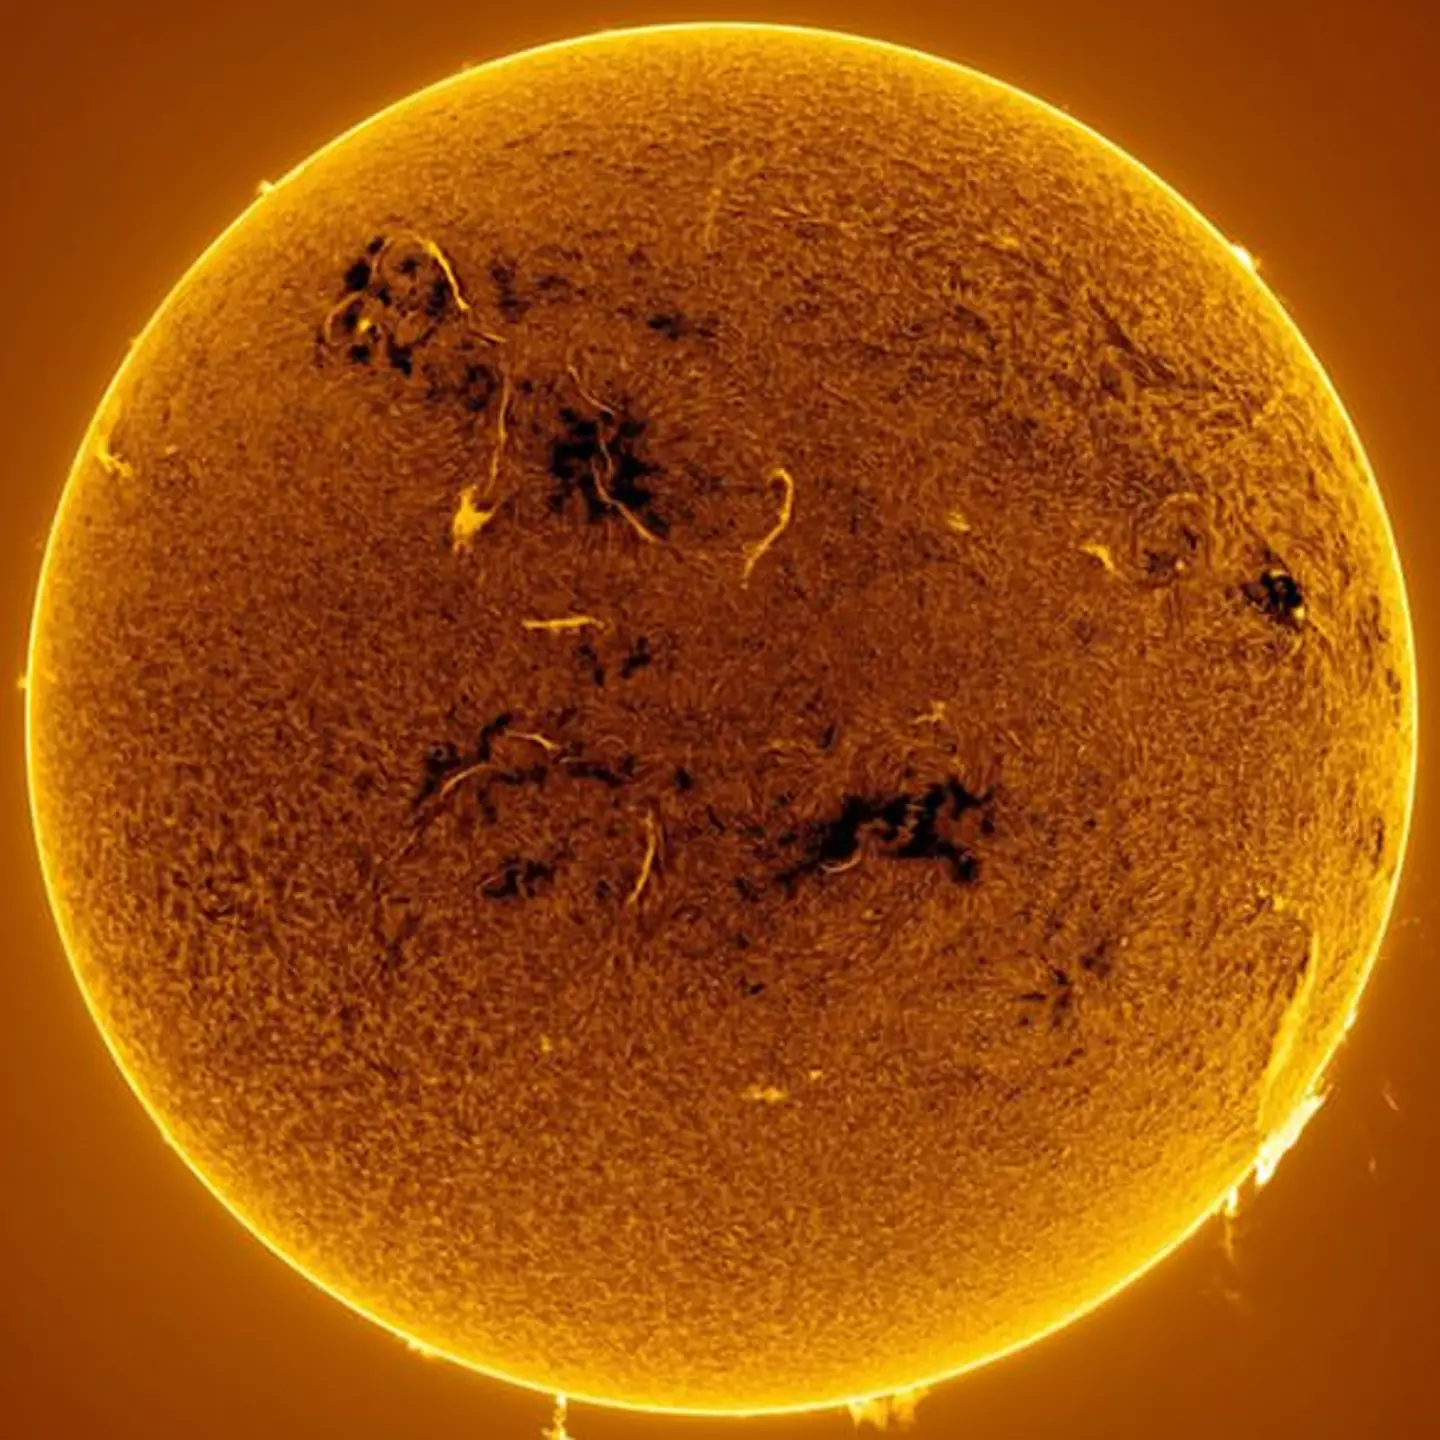 Photographer snaps rare photo of 200,000km-high plasma wall erupting from 5,600C surface of the Sun